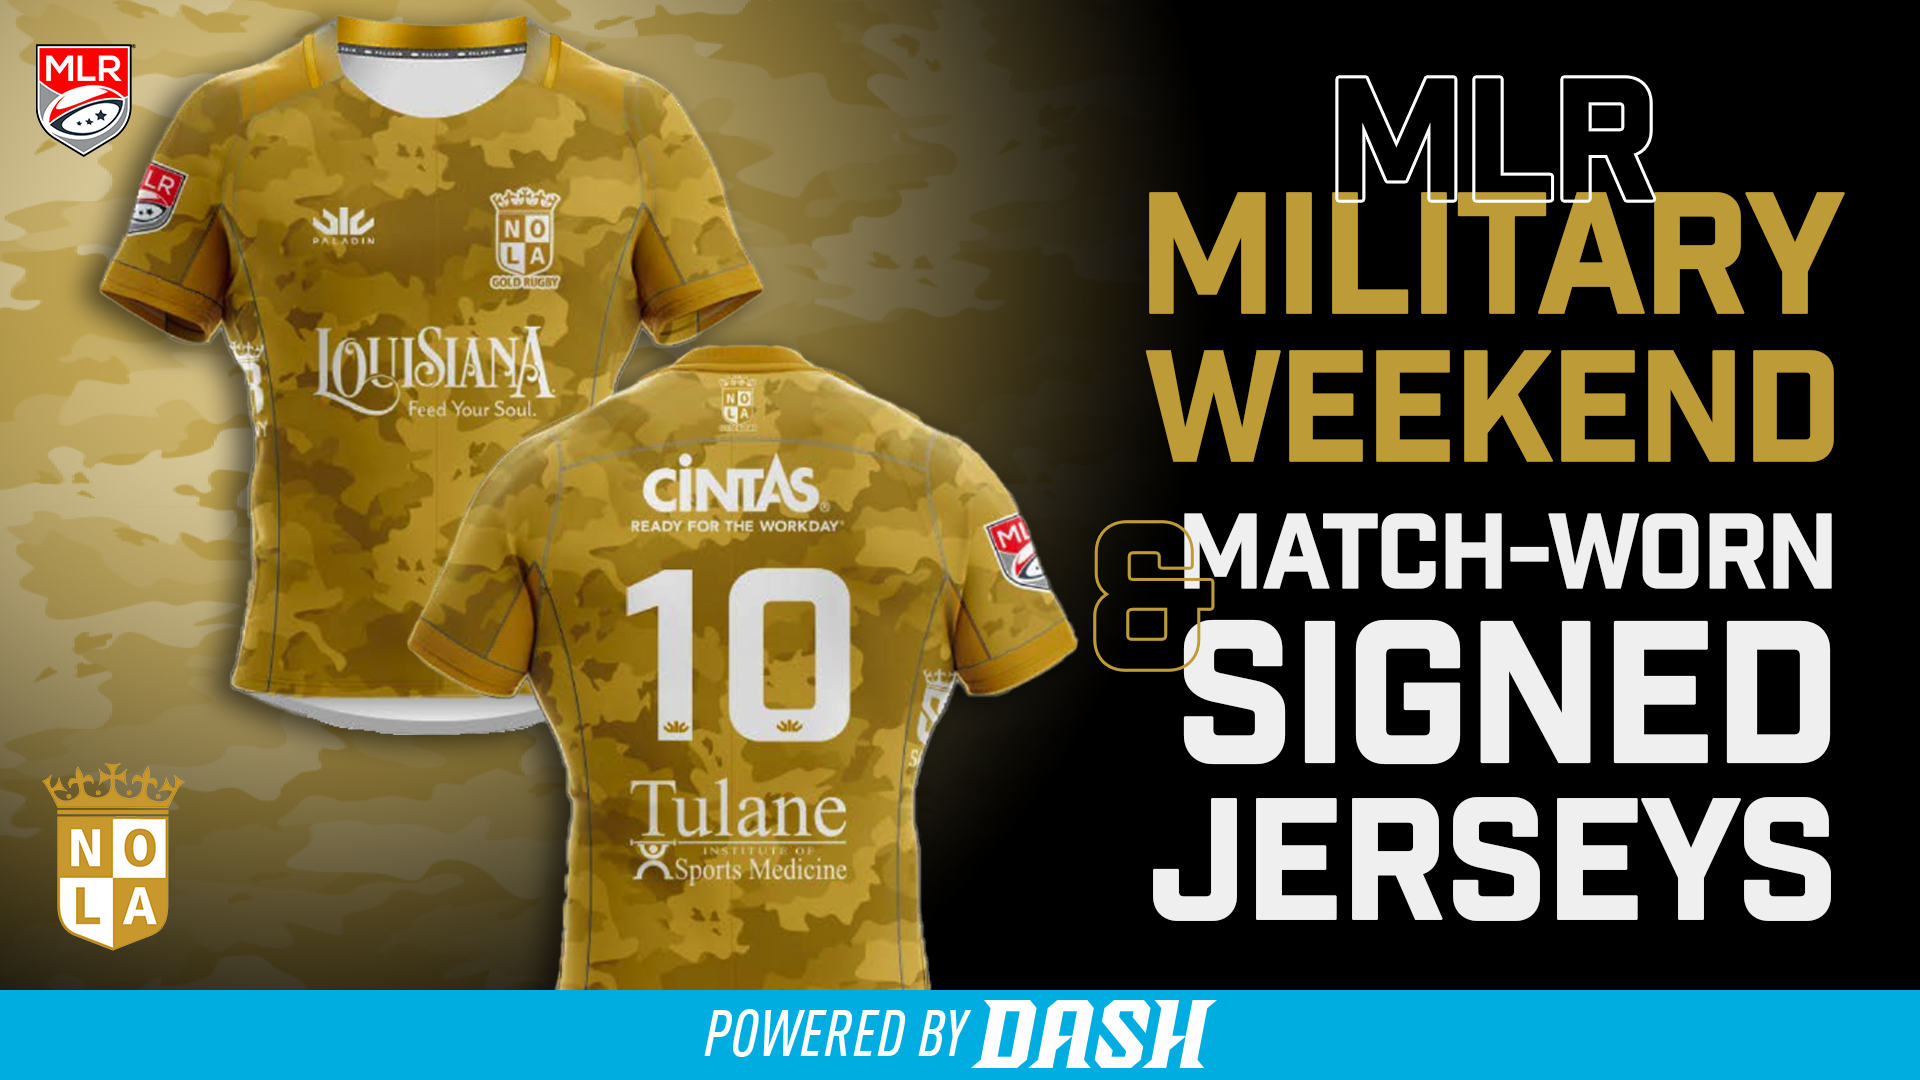 Bid Now on our Military Appreciation Jerseys